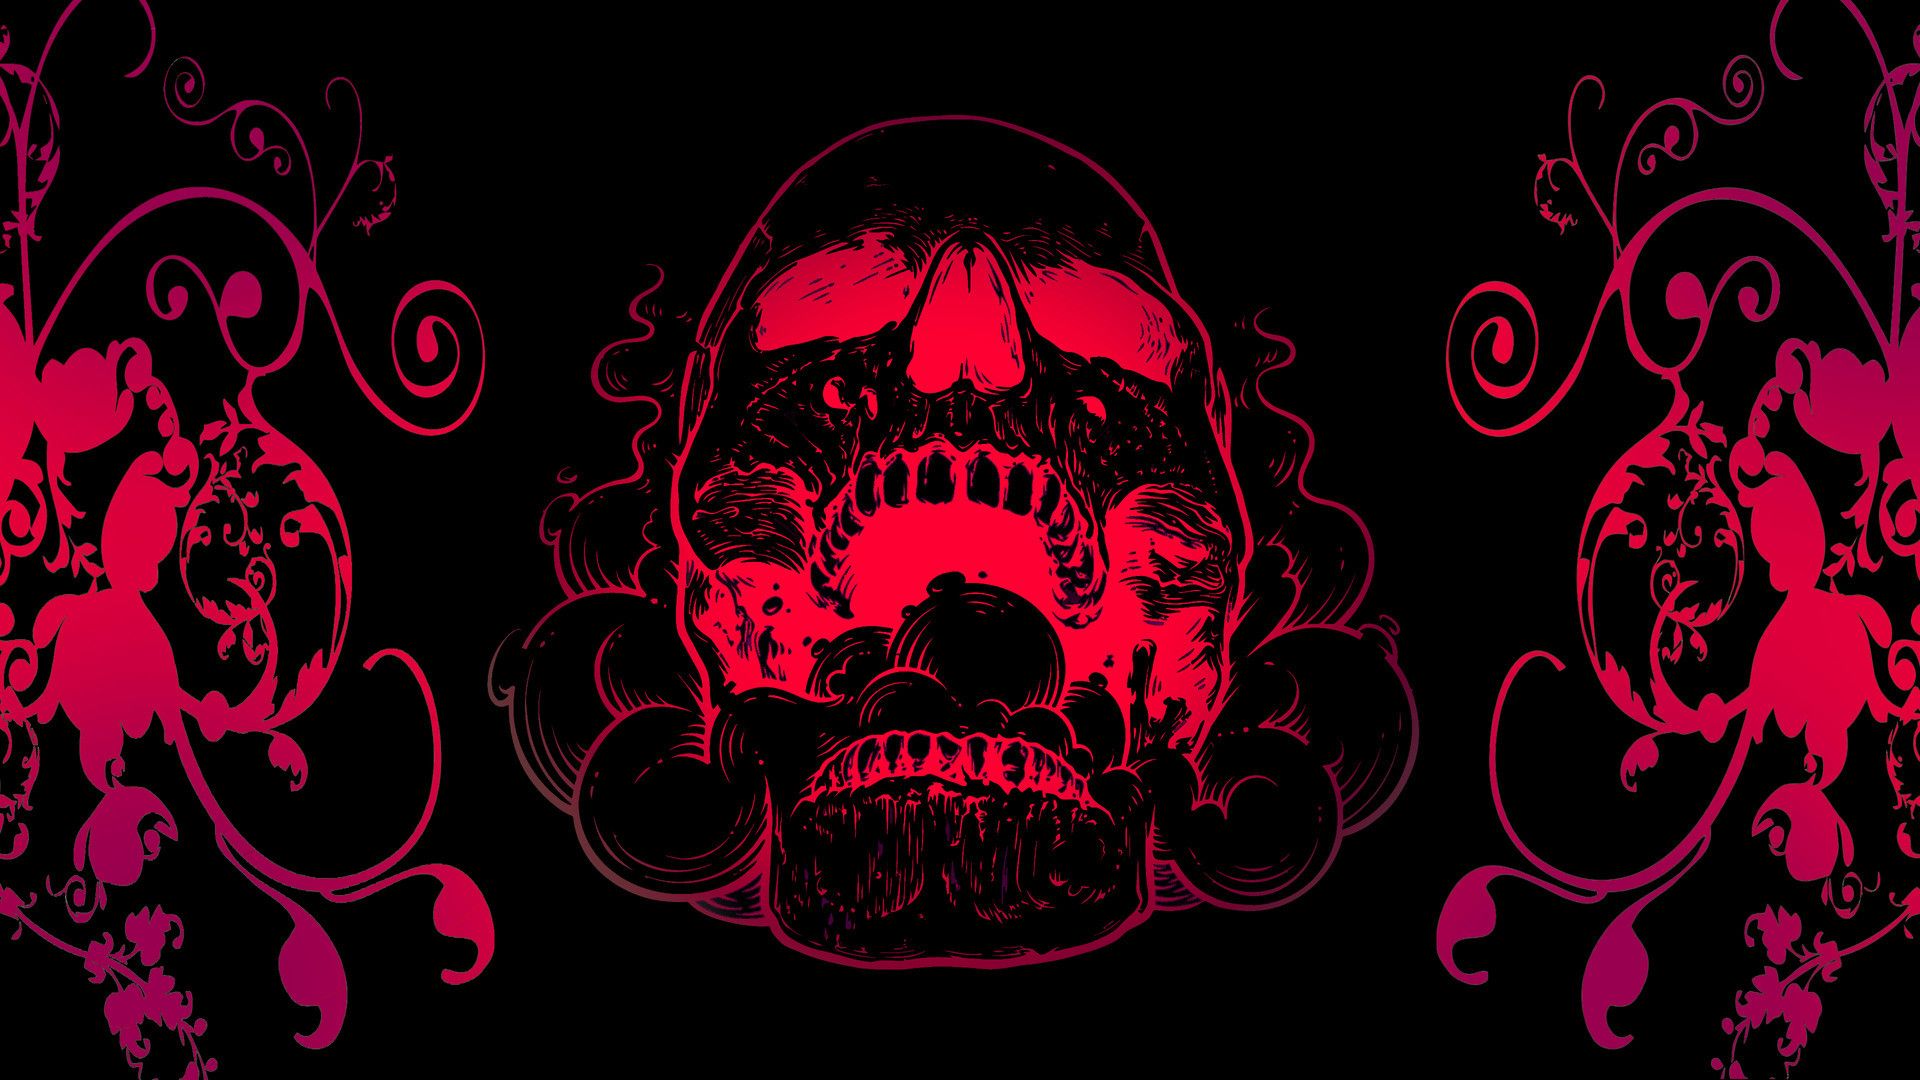 A skull with a red glow and pink floral patterns on a black background. - Skull